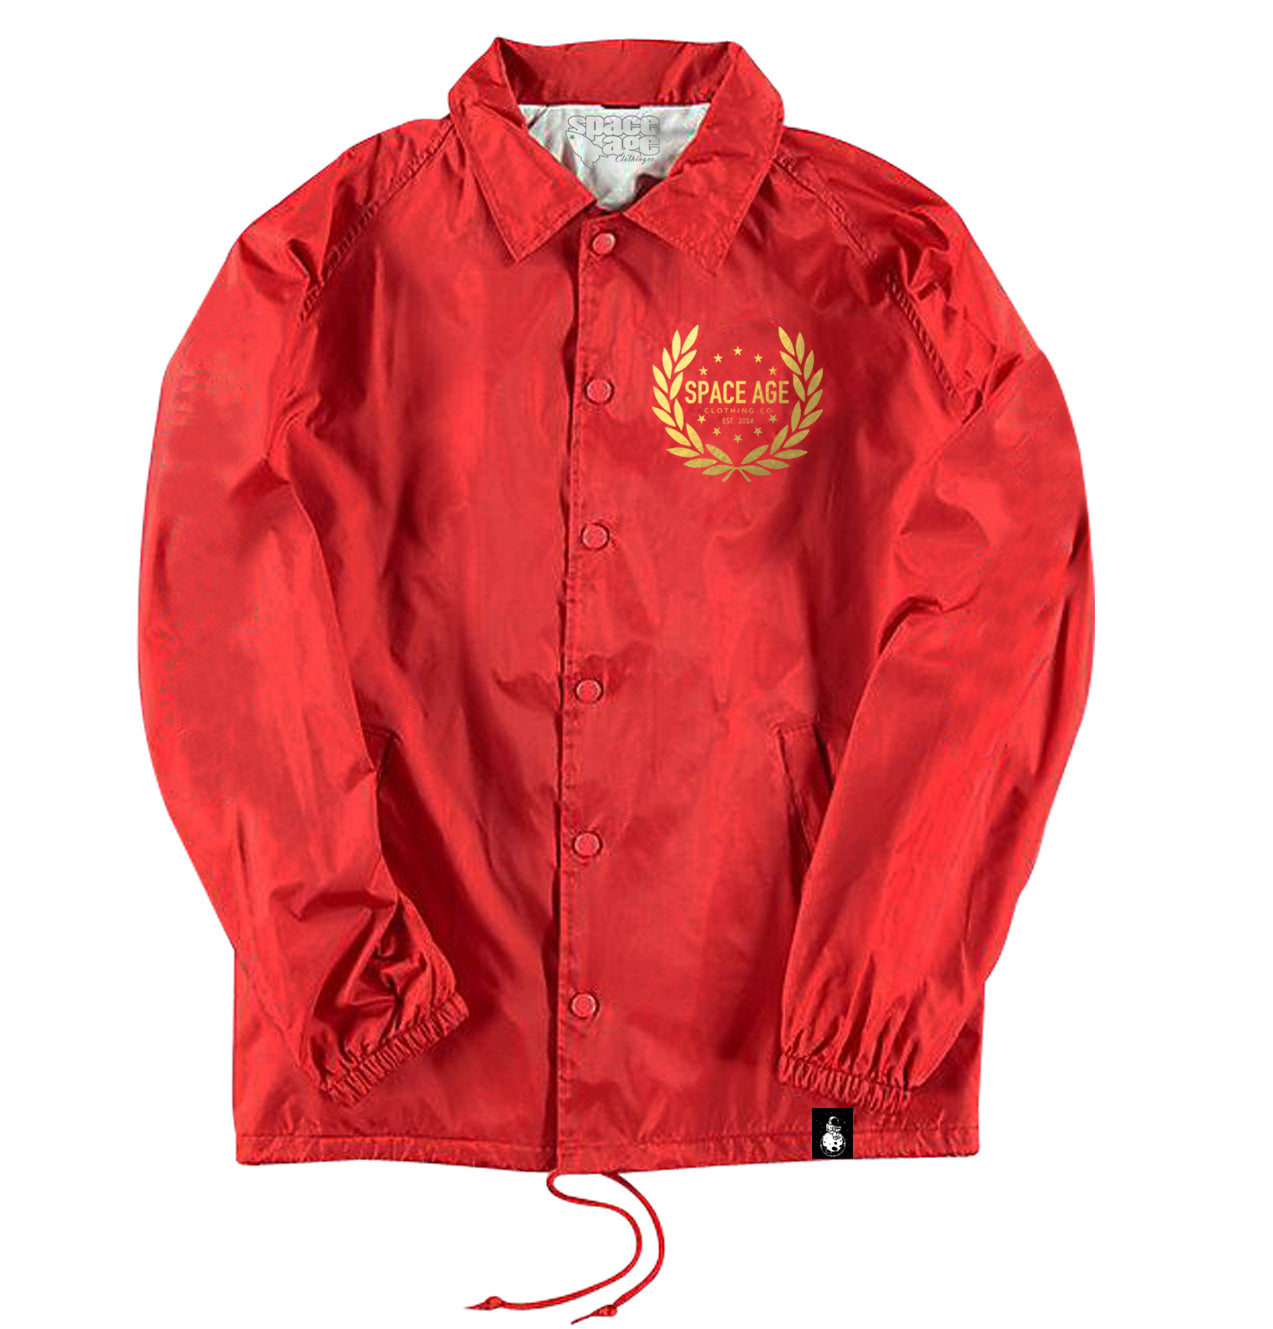 Gold Foil on Red Coaches Jacket